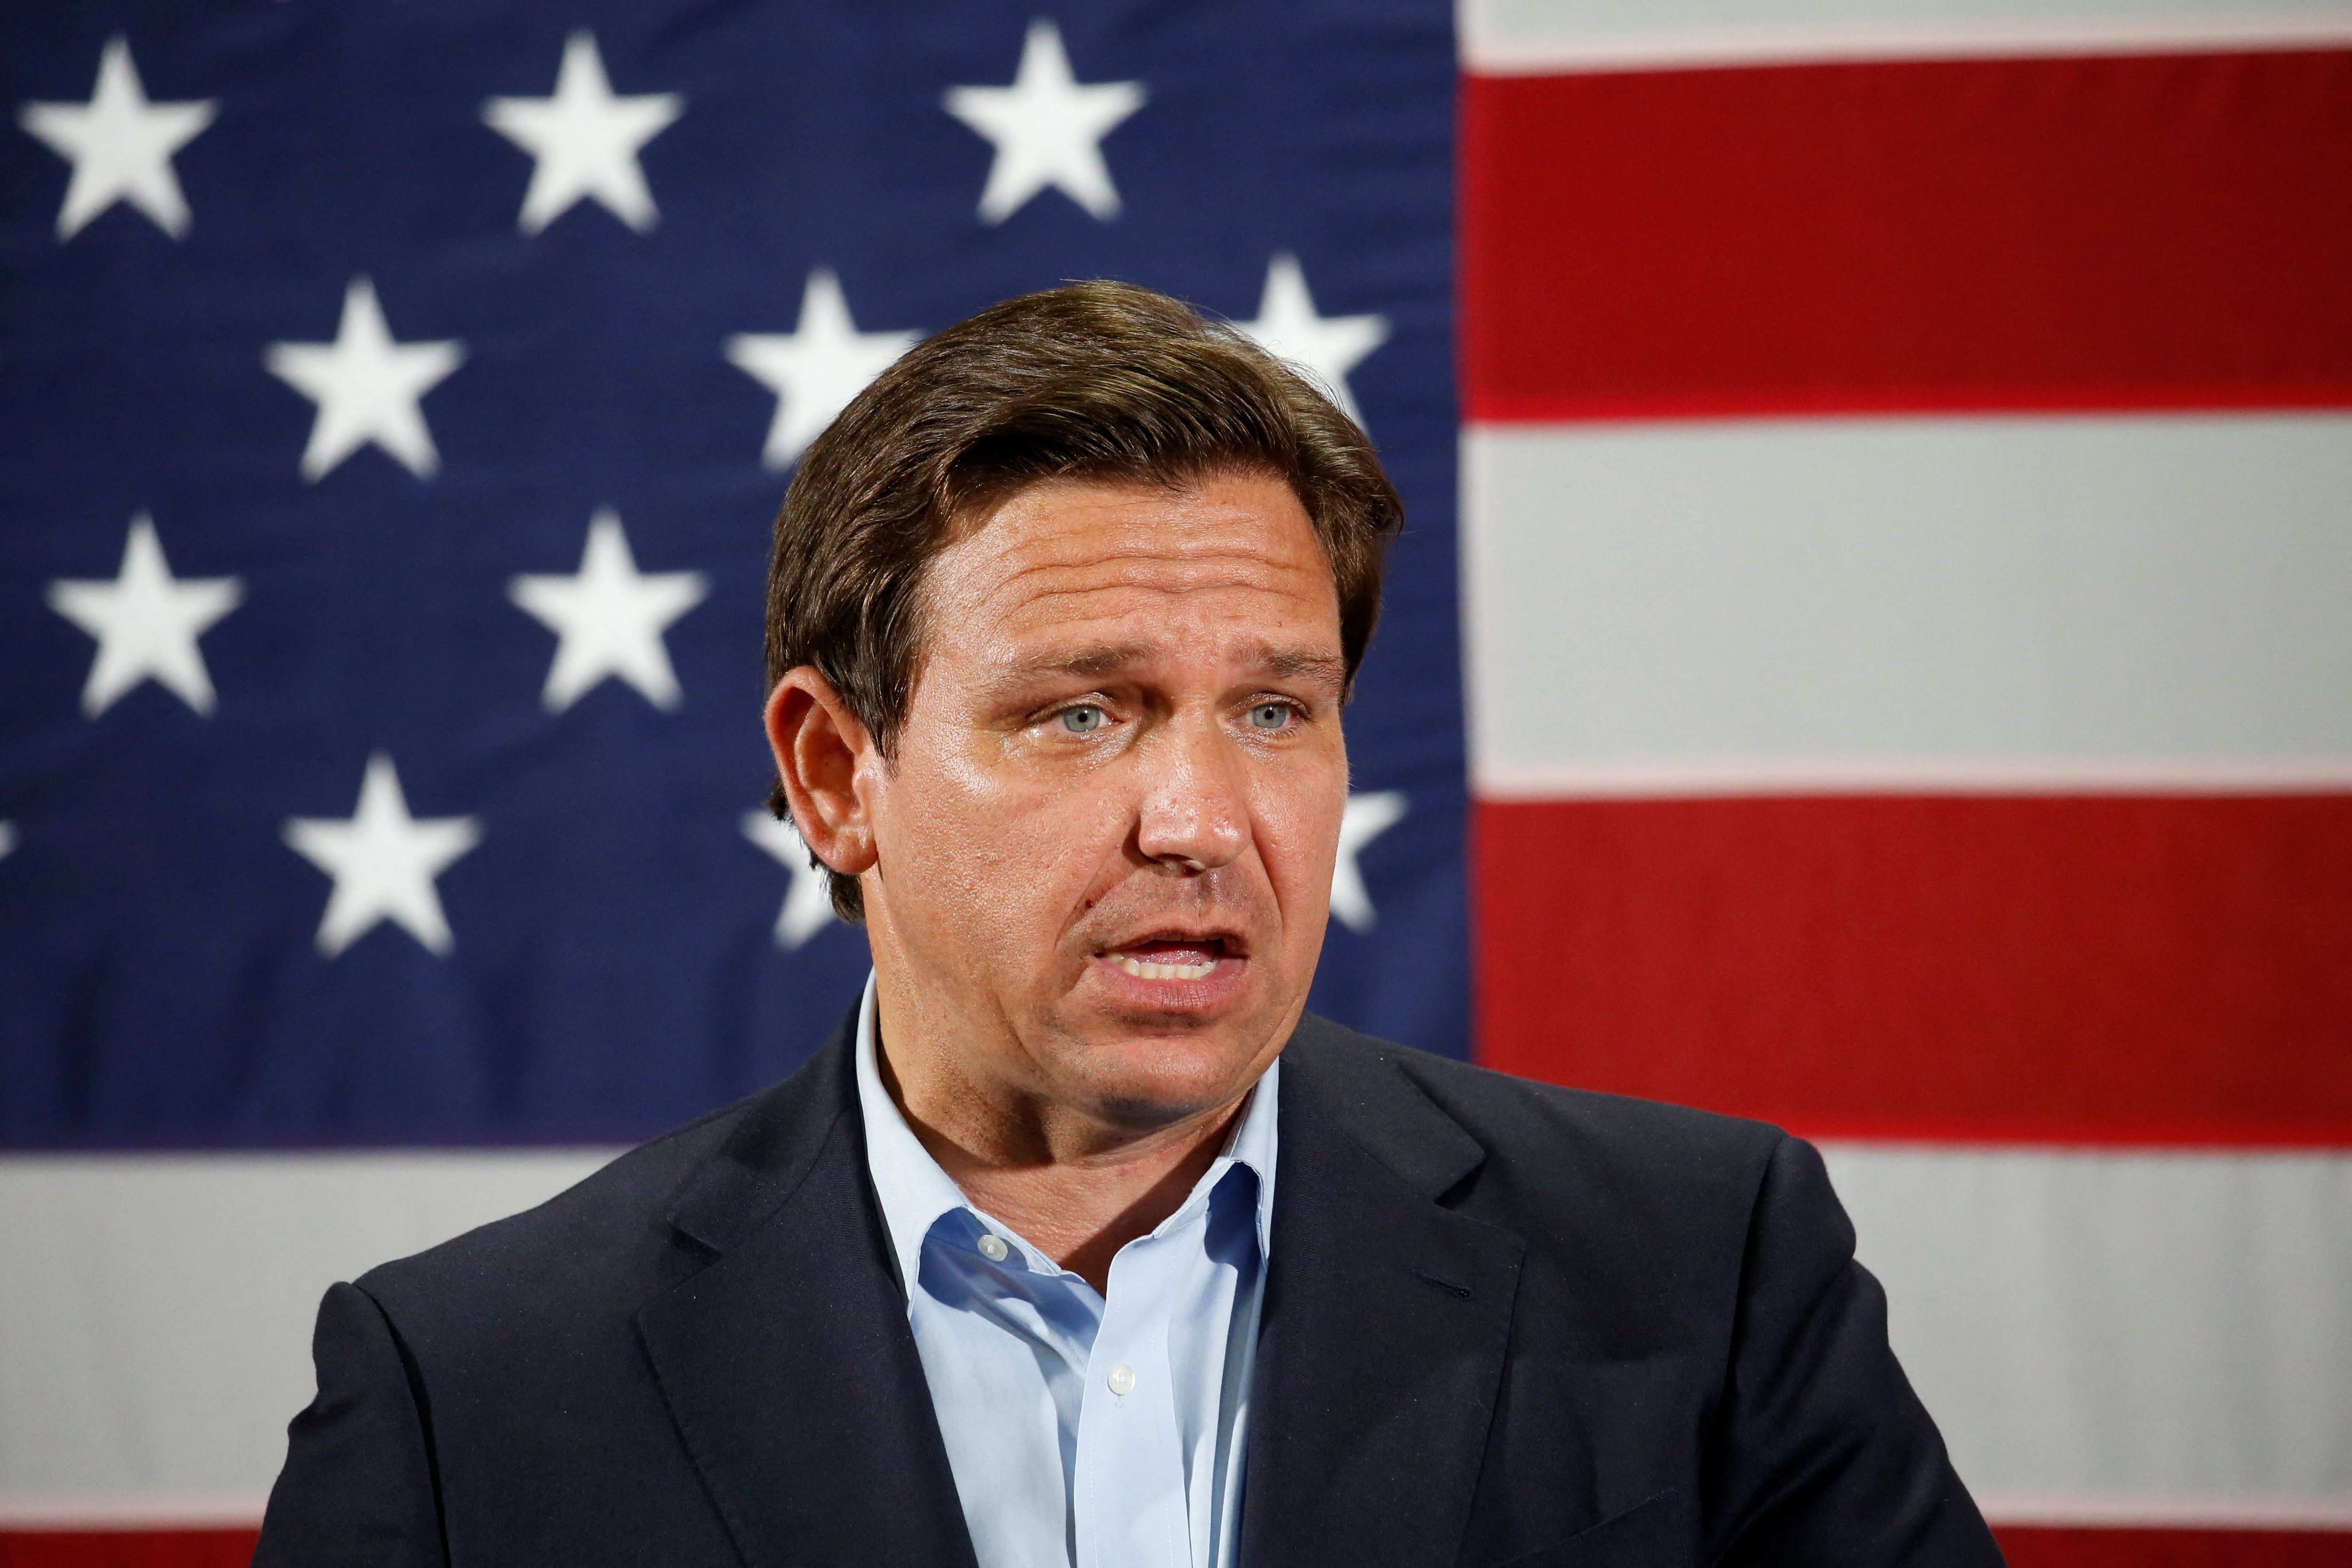 Florida Governor Ron DeSantis speaks during a rally ahead of the midterm elections, in Hialeah, Florida, U.S., November 7, 2022. REUTERS/Marco Bello